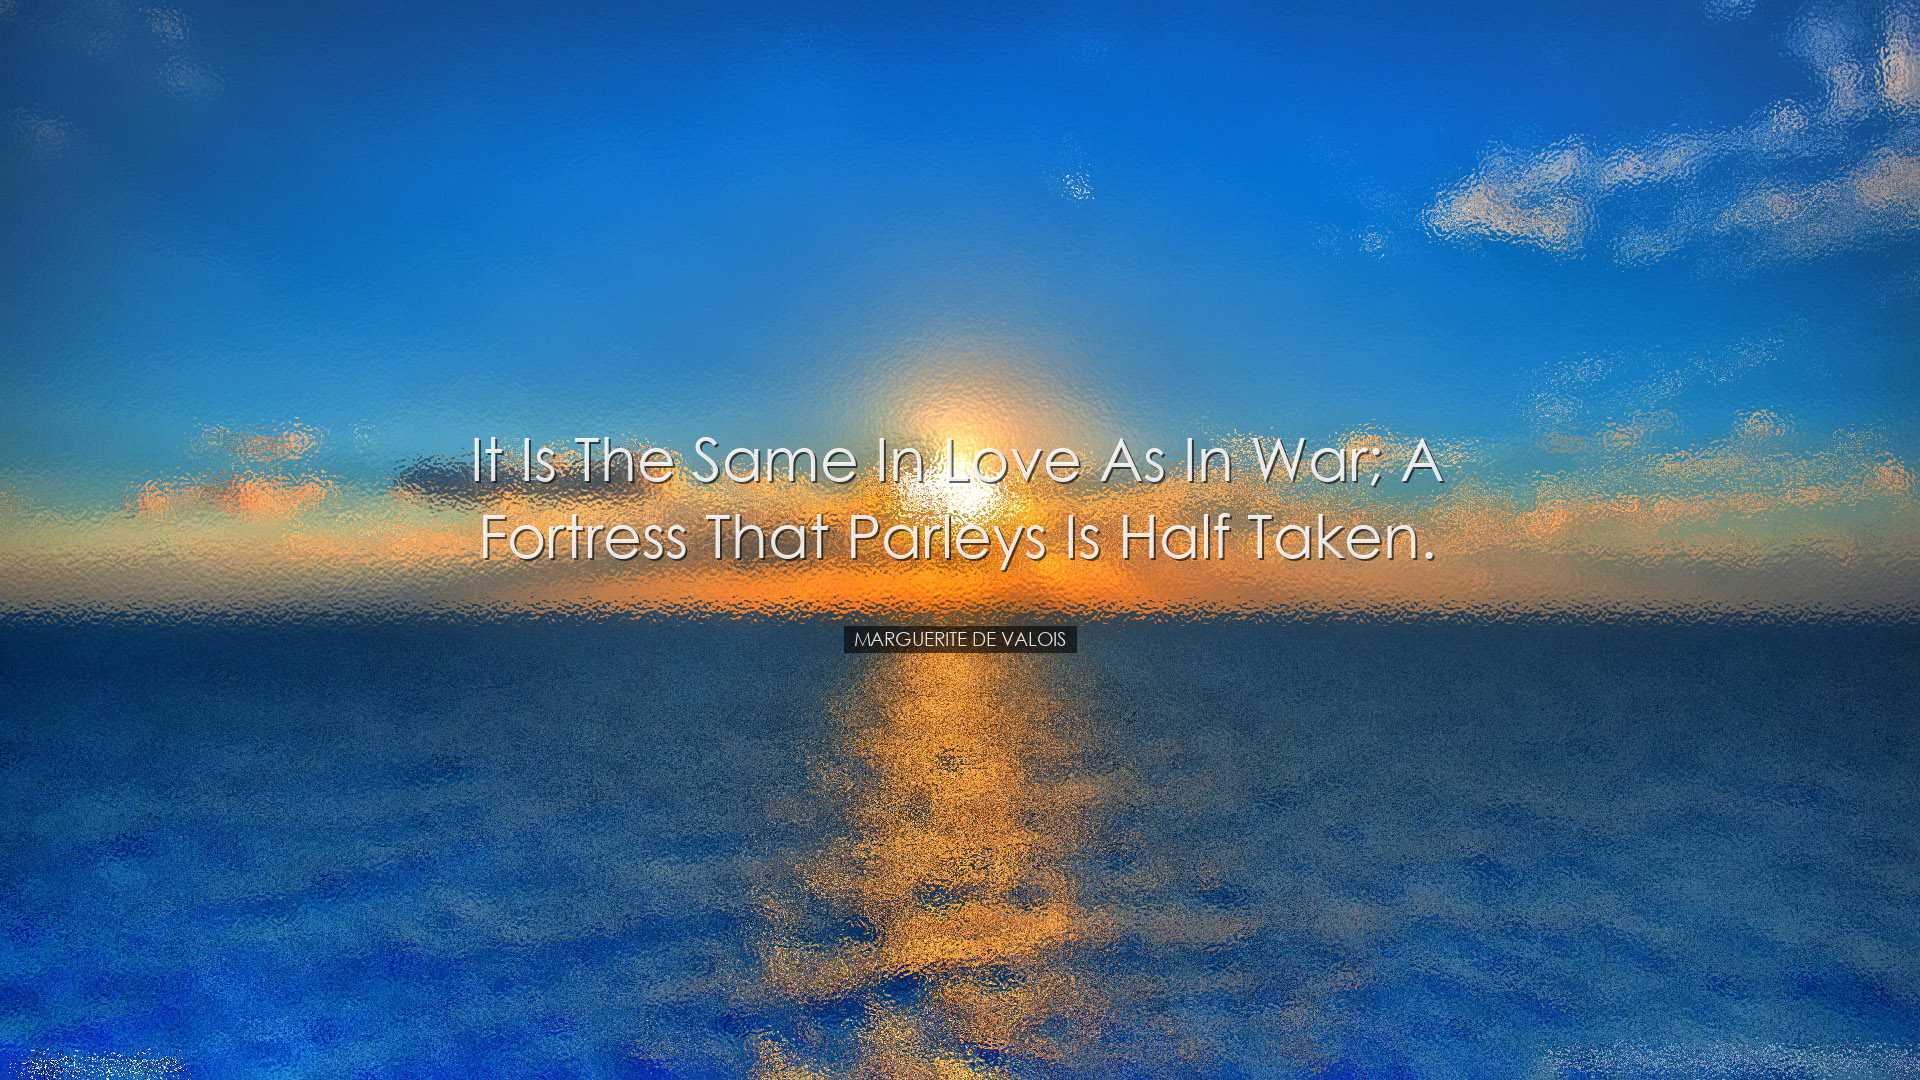 It is the same in love as in war; a fortress that parleys is half